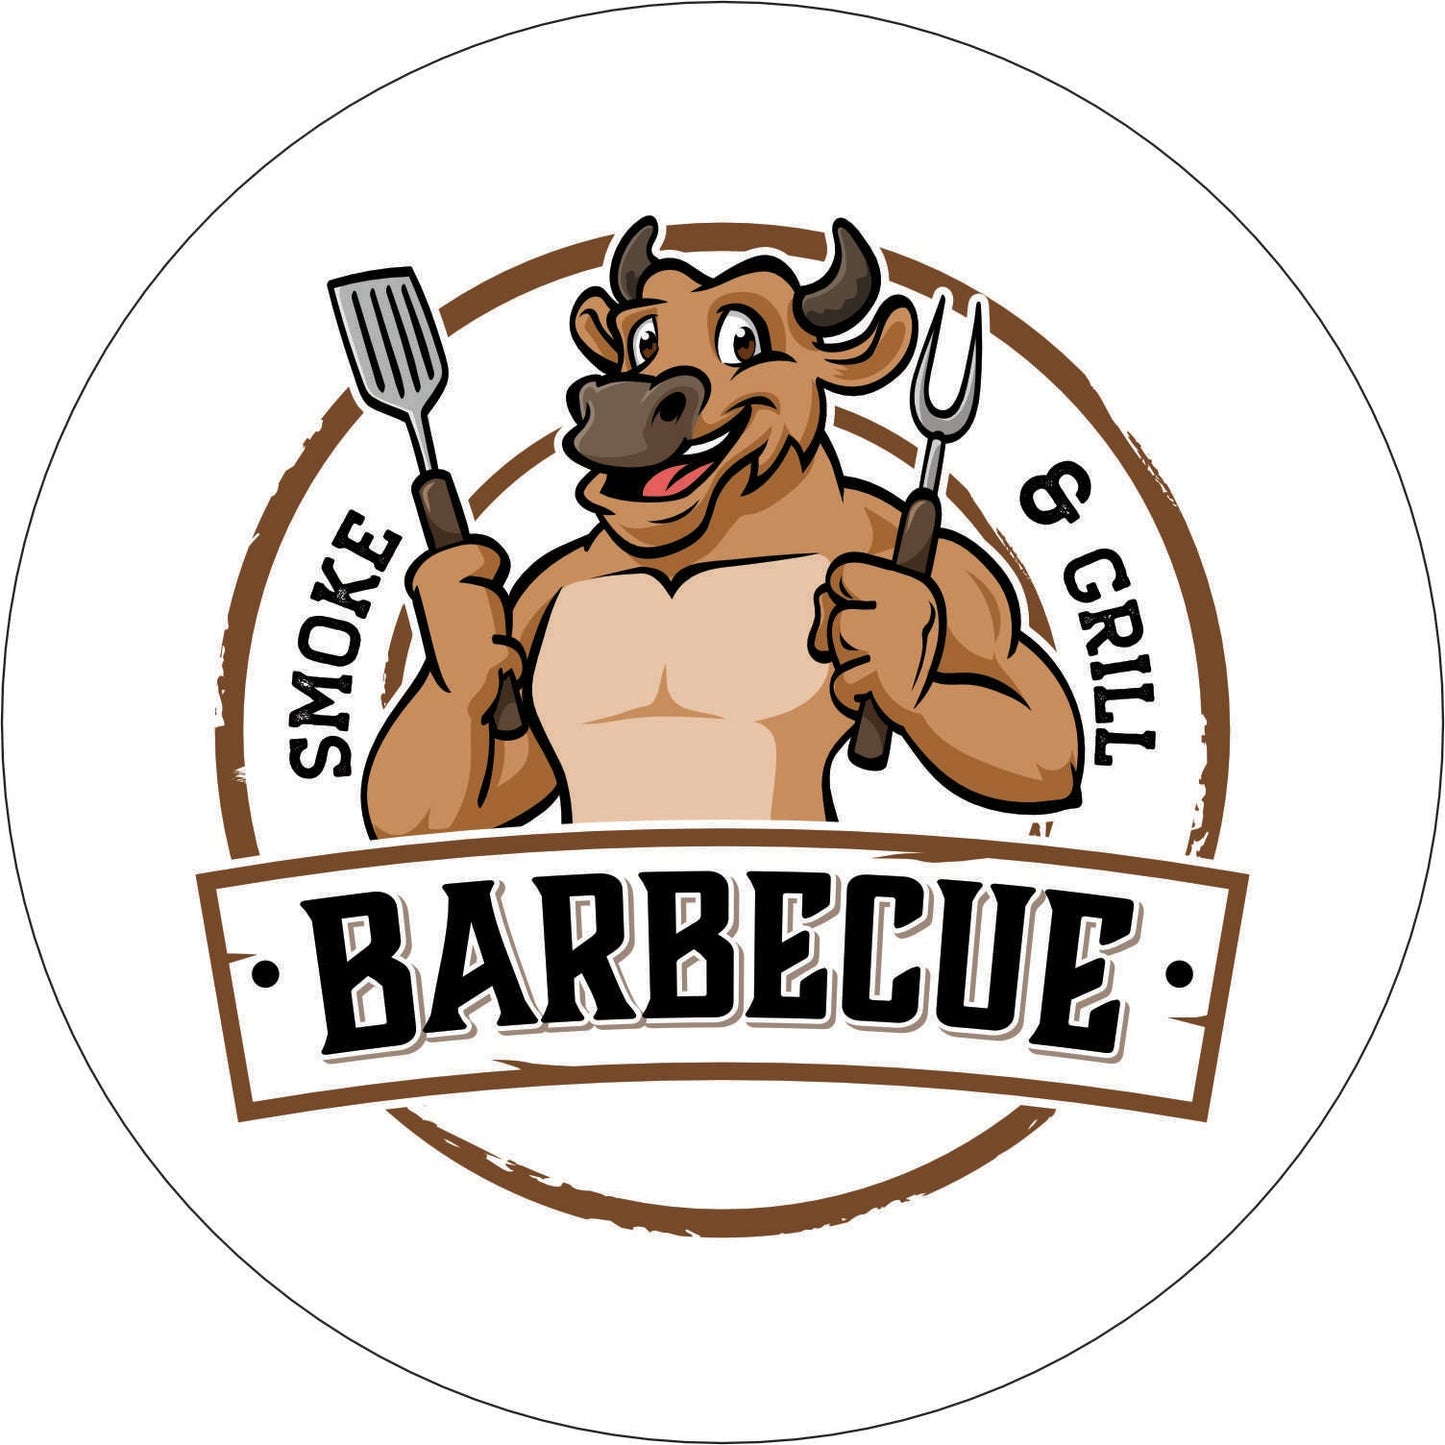 051-Single-sided illuminated sign - BBQ Smoke & Grill Barbecue